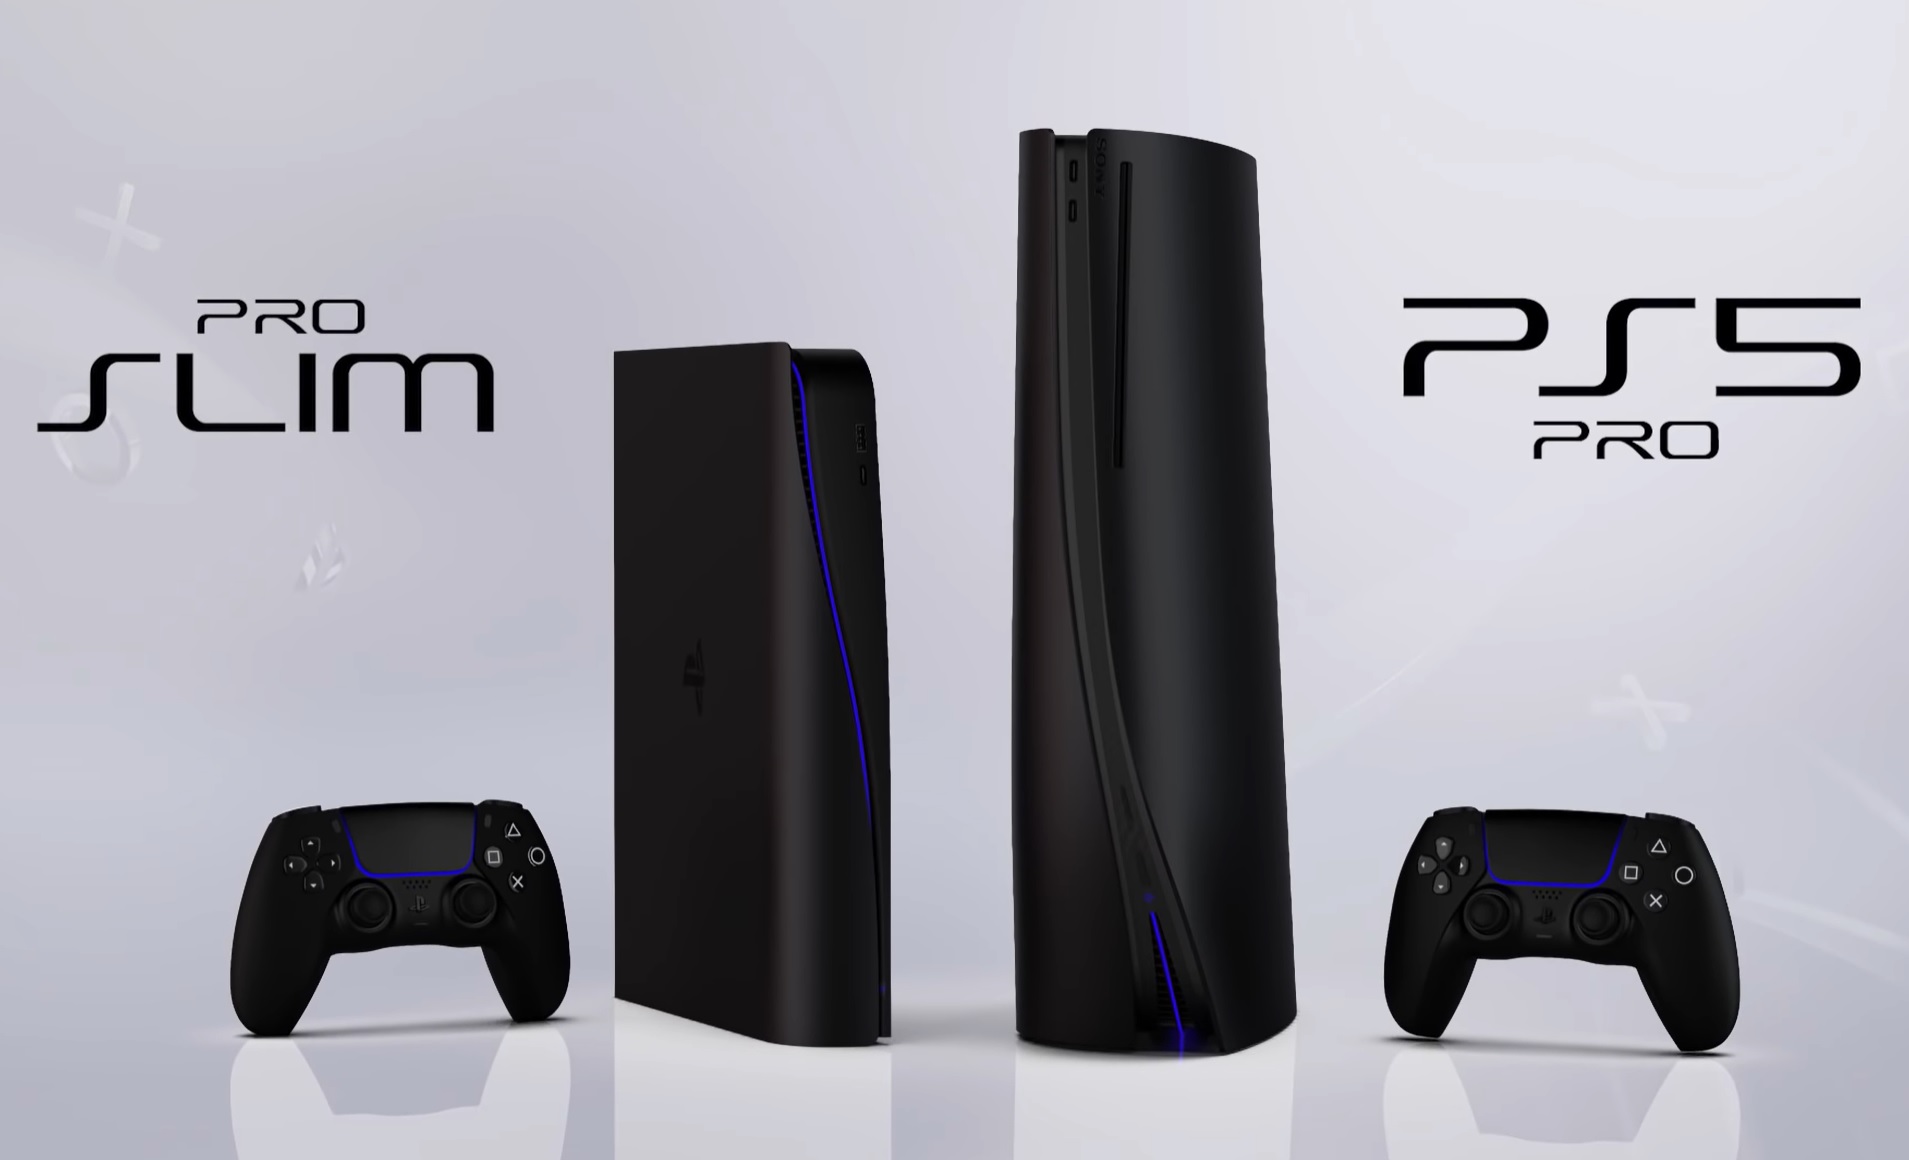 PS5 Pro vs PS5 Slim 2023 release likelihood: Sony comments spark for former while tipster's PlayStation 5 hardware roadmap suggests latter NotebookCheck.net News